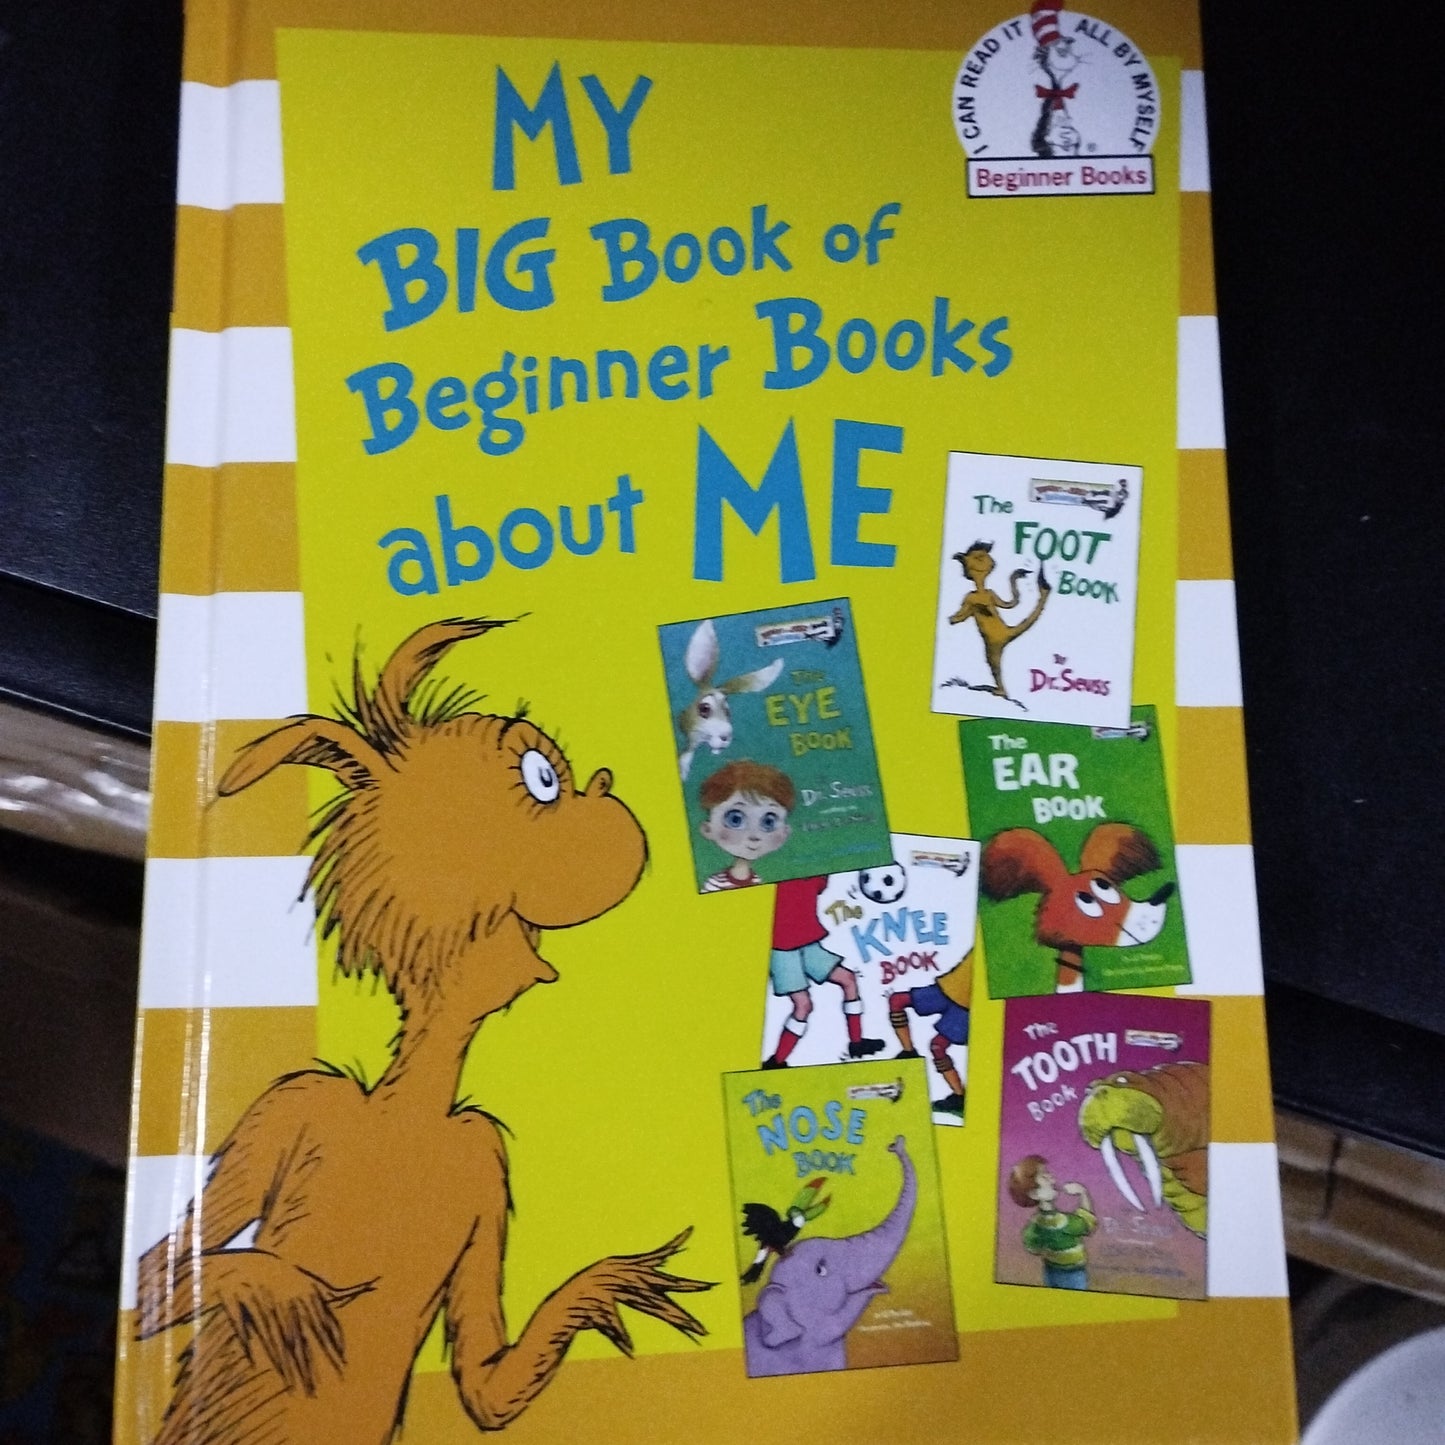 MY BIG Book of Beginner Books about ME